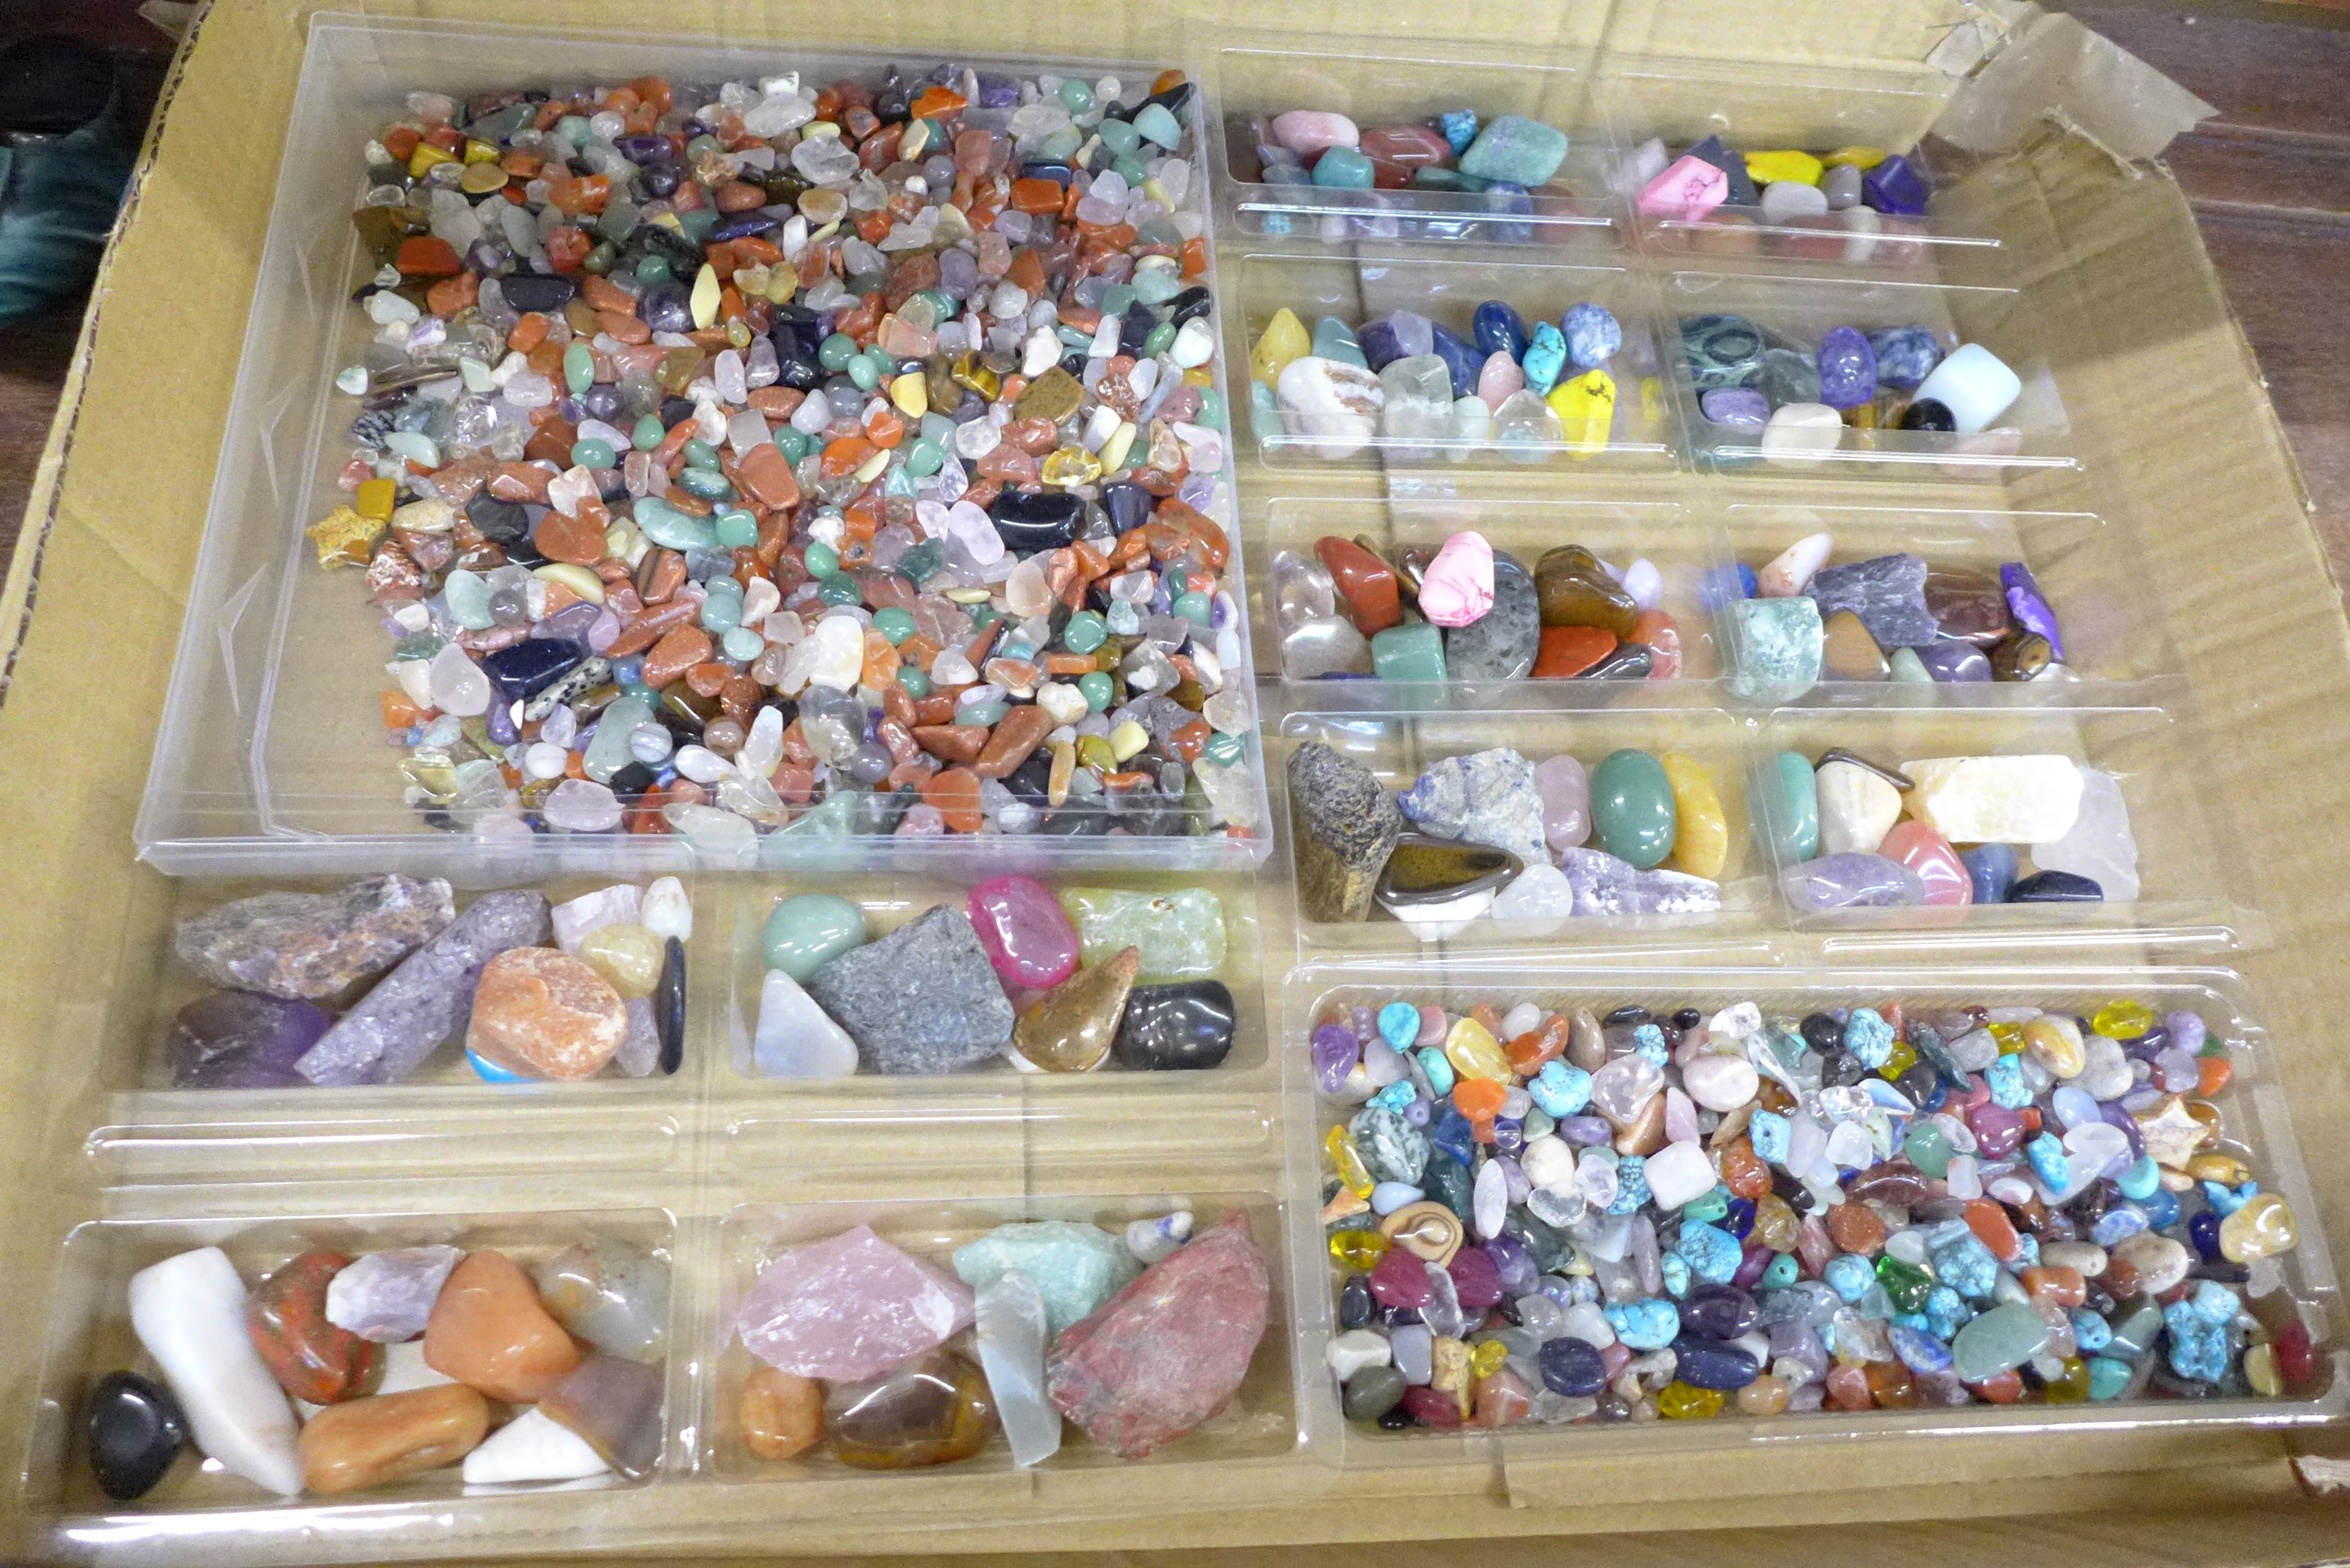 A large collection of semi-precious stones